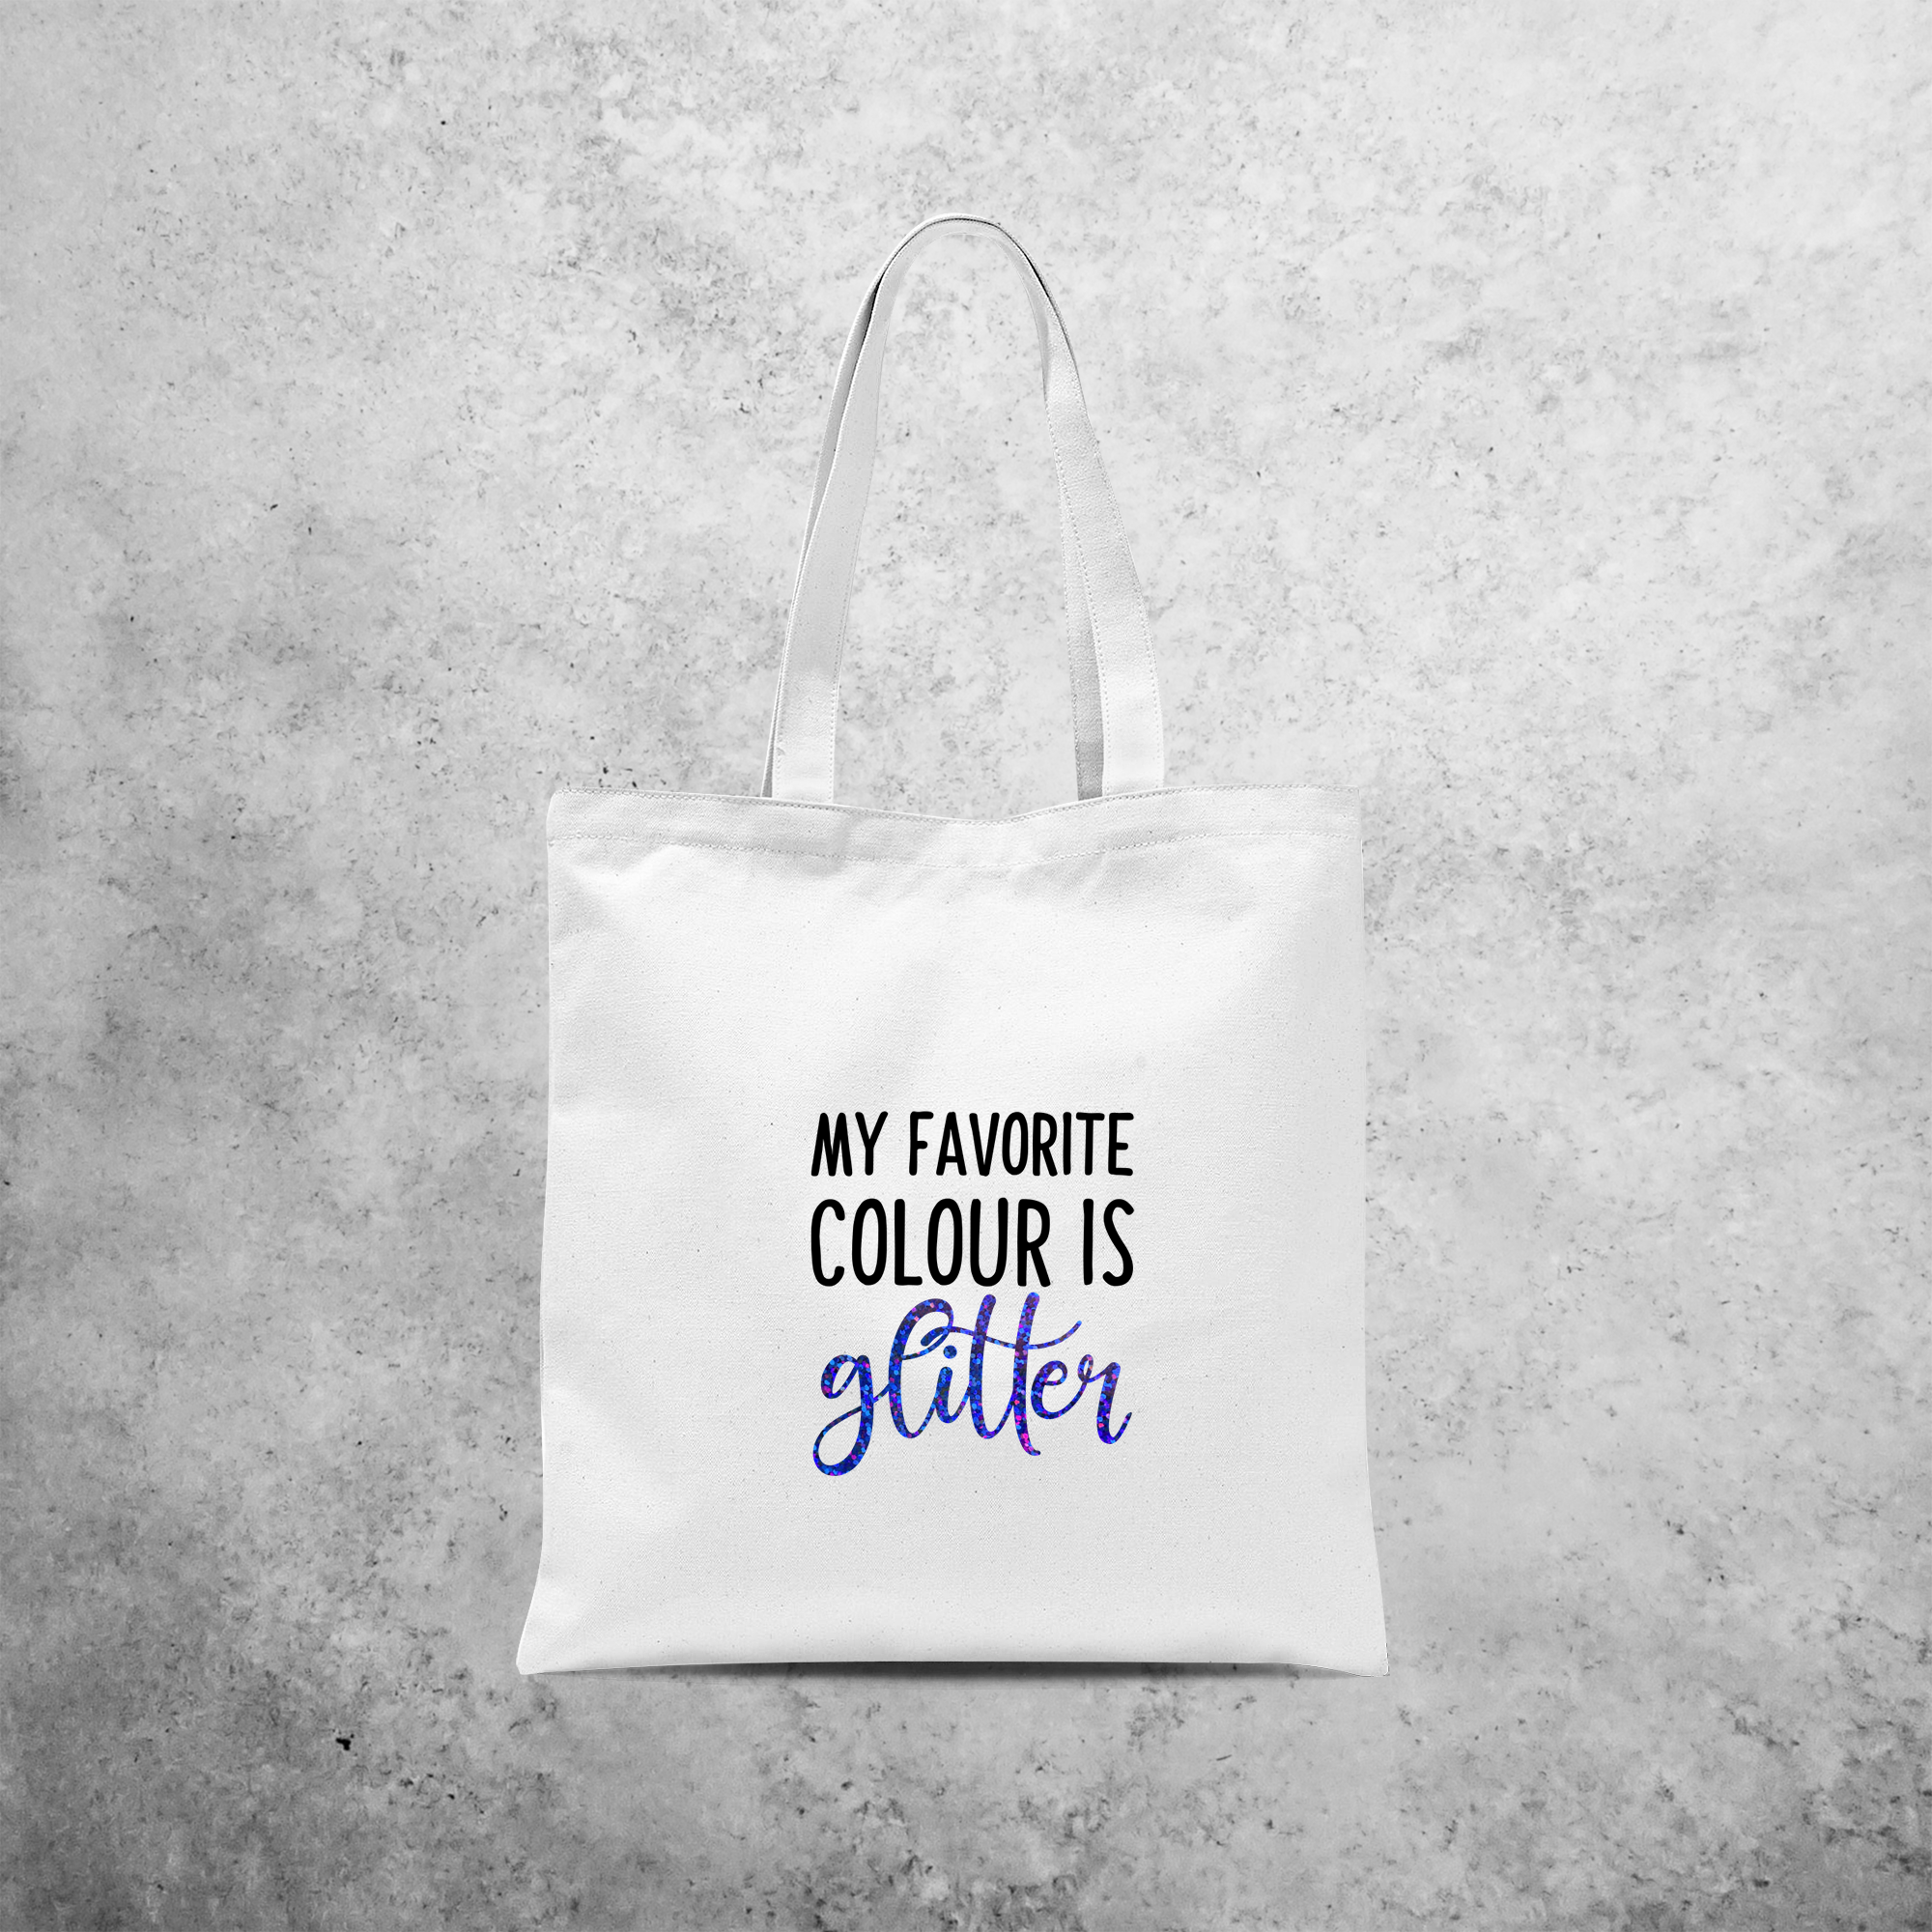 'My favorite colour is glitter' tote bag